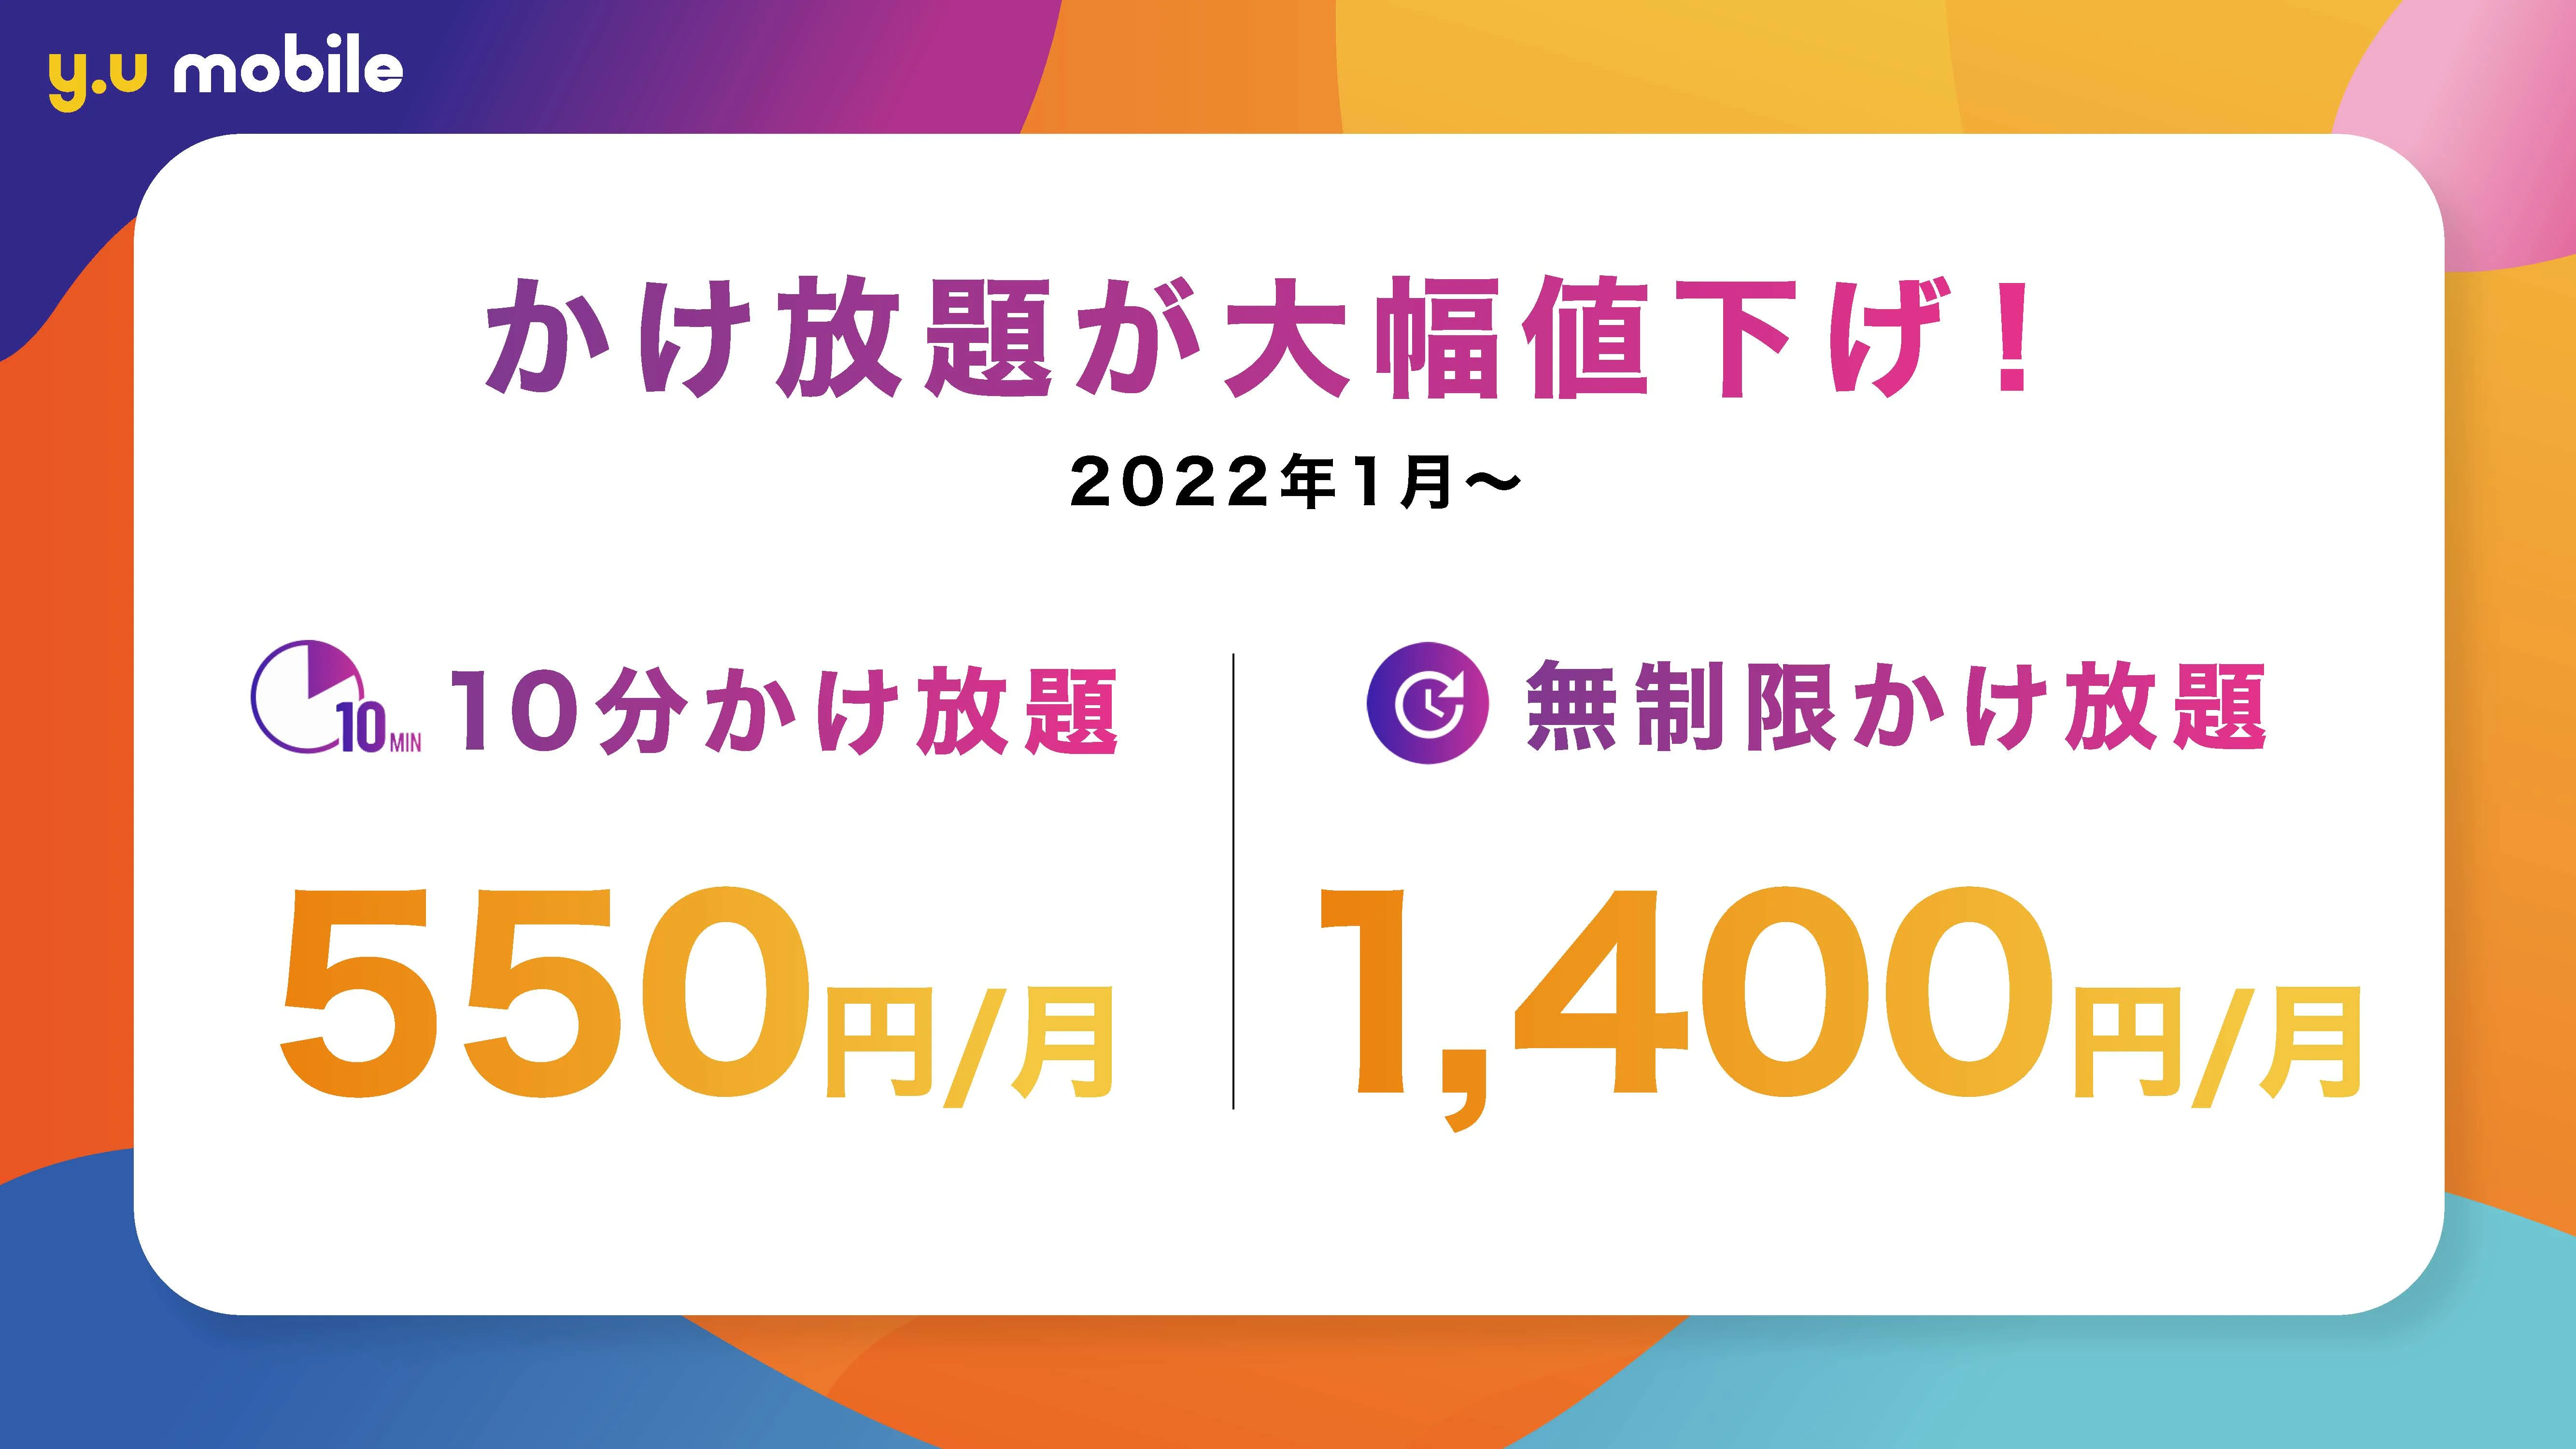 y.u mobileかけ放題が大幅値下げ